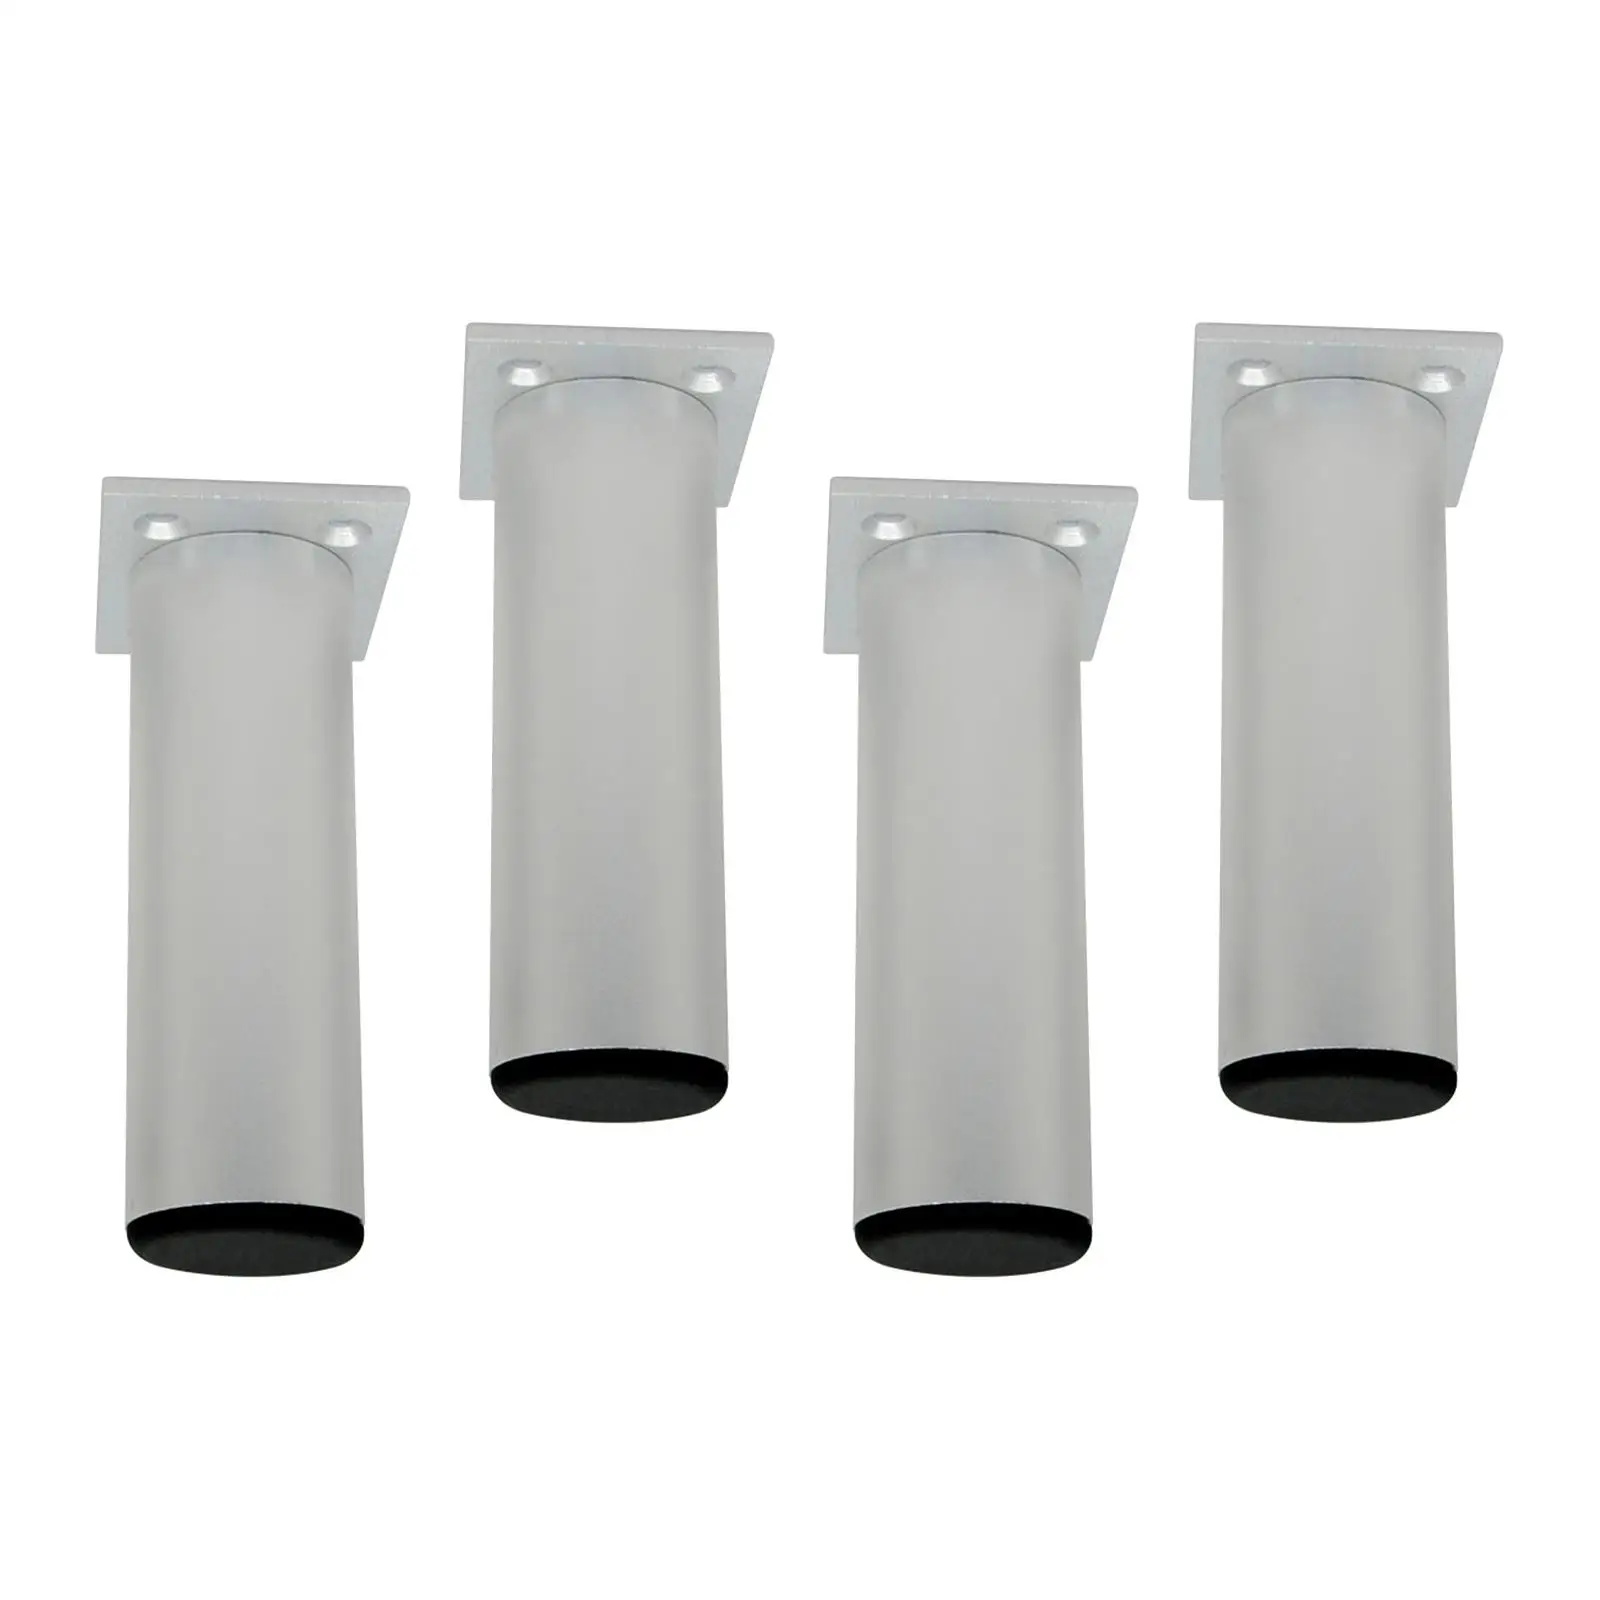 4Pcs Furniture Leg Replacement Adjustable Multifunction Bed Leg Support Feet for TV Stand Furniture Bed Coffee Table Cabinet